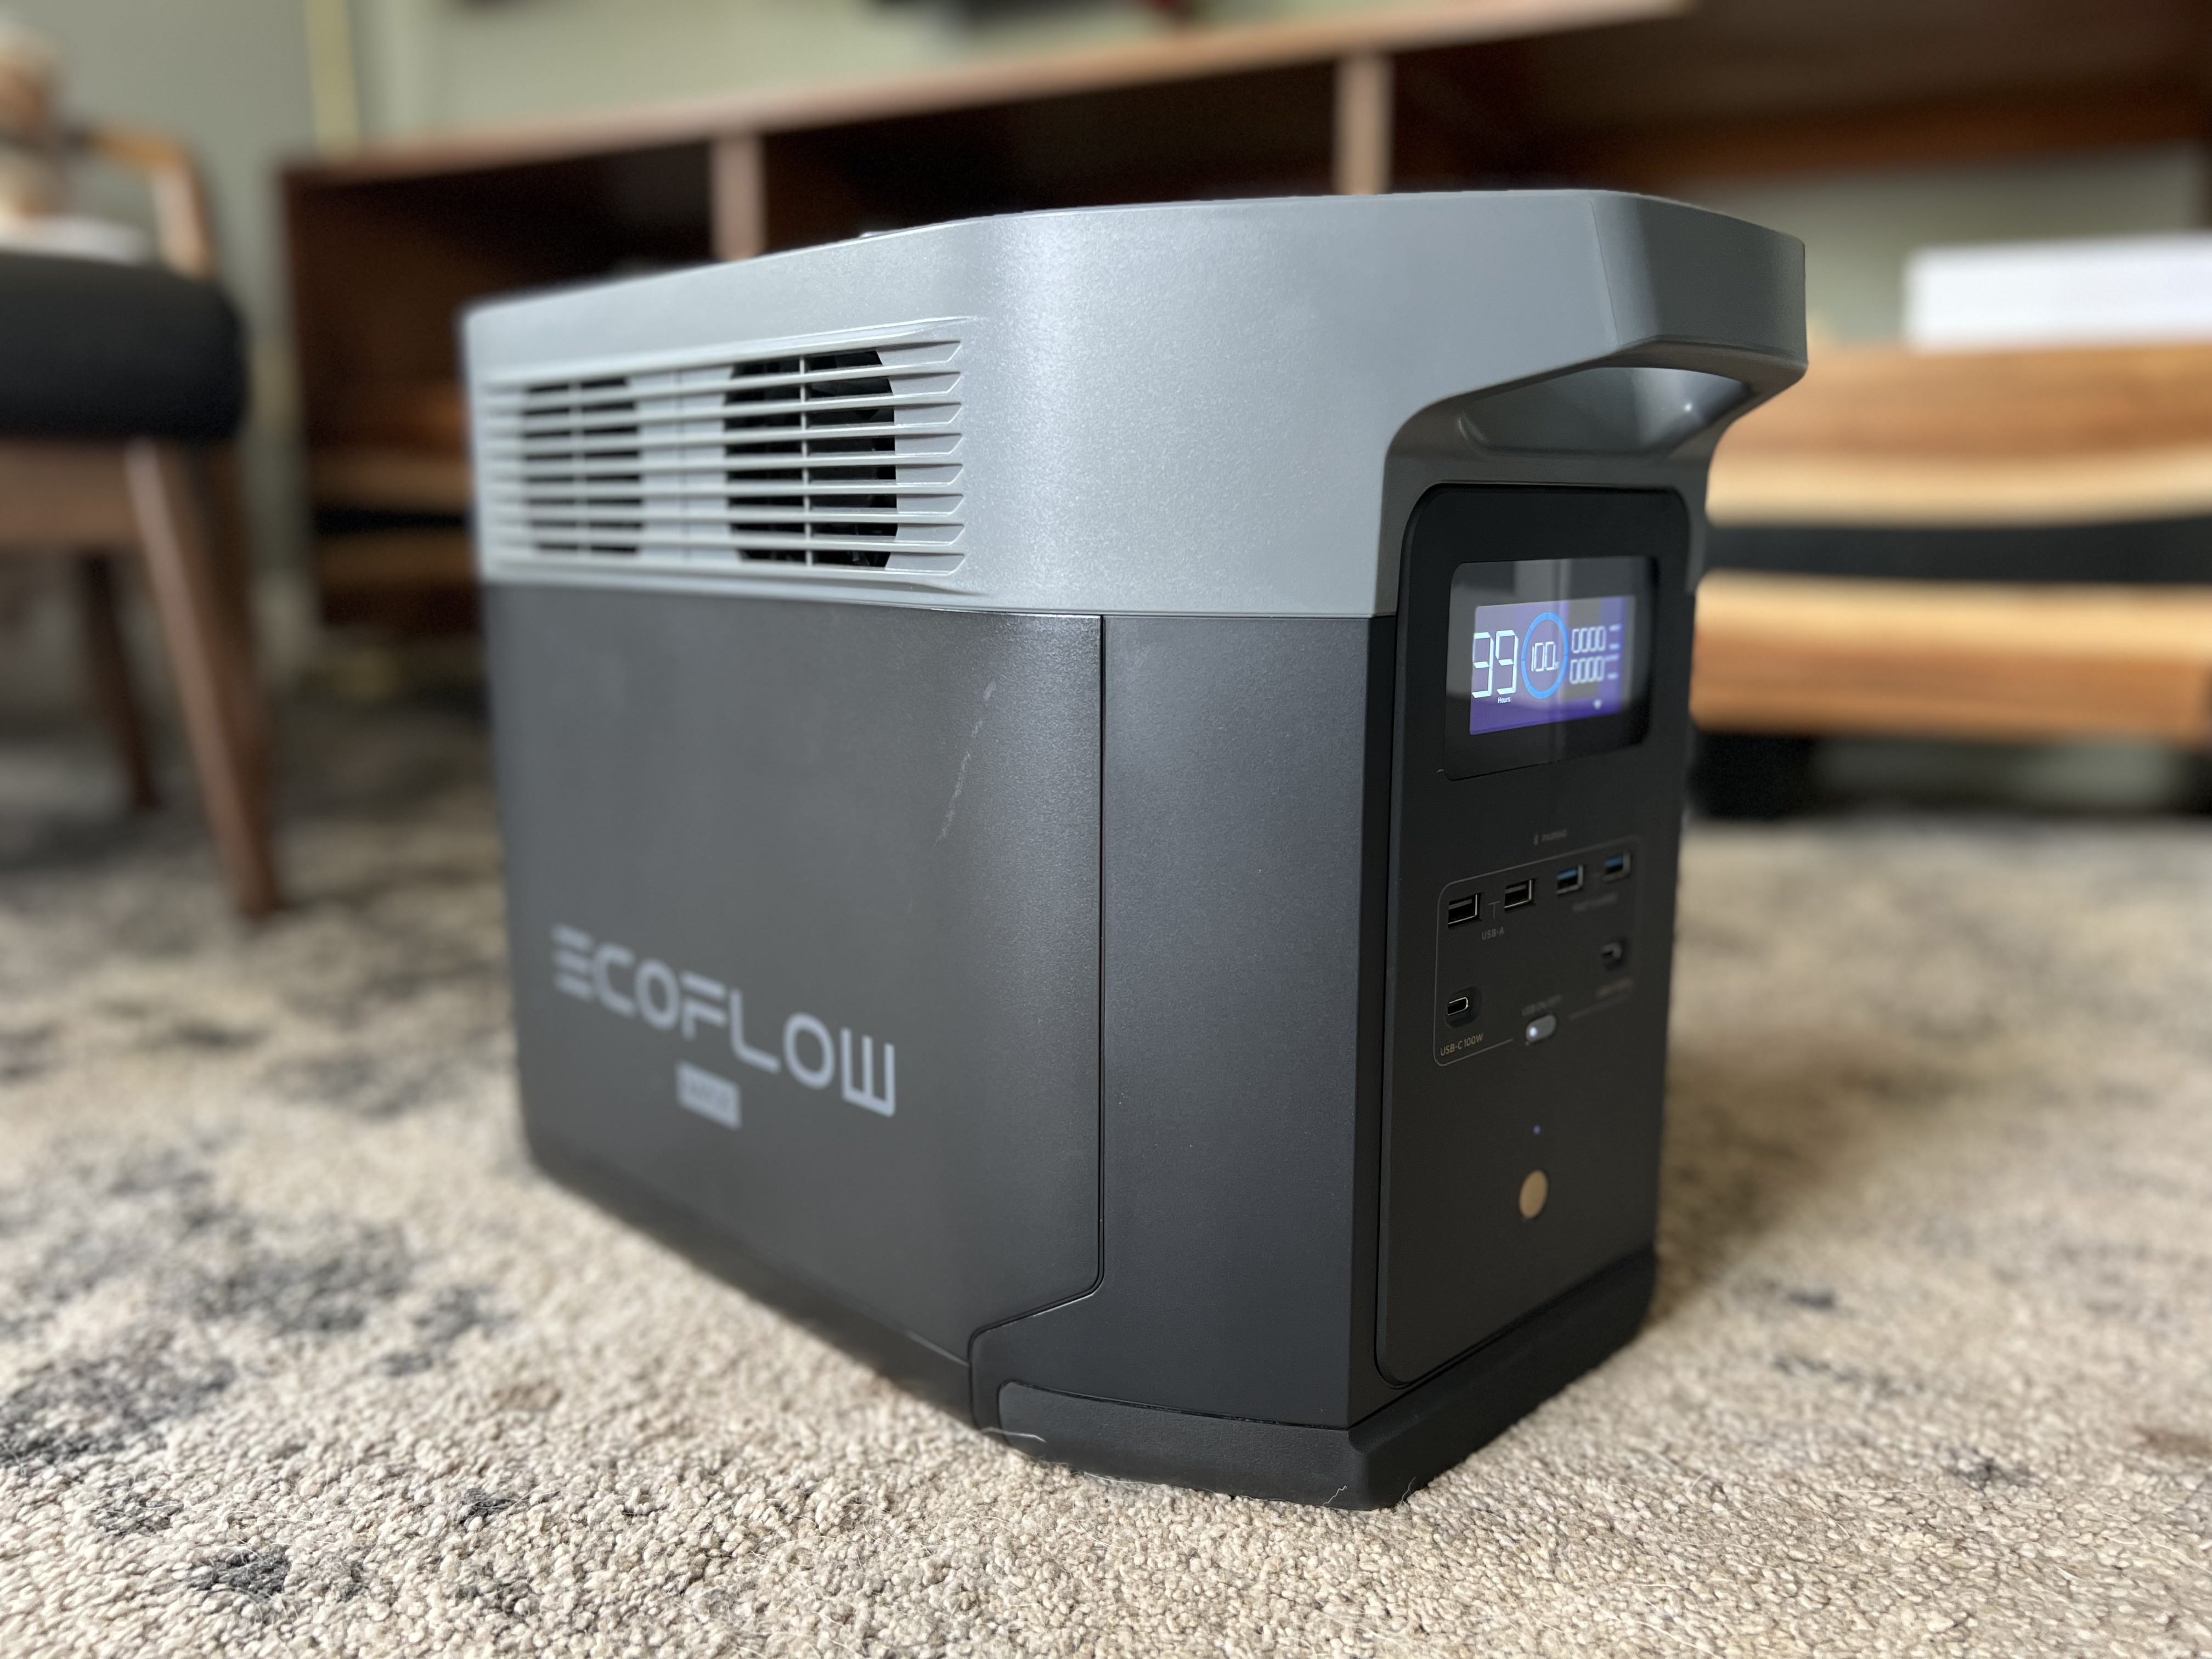 2kWh EcoFlow DELTA 2 Max Portable Power Station / Battery / Storage